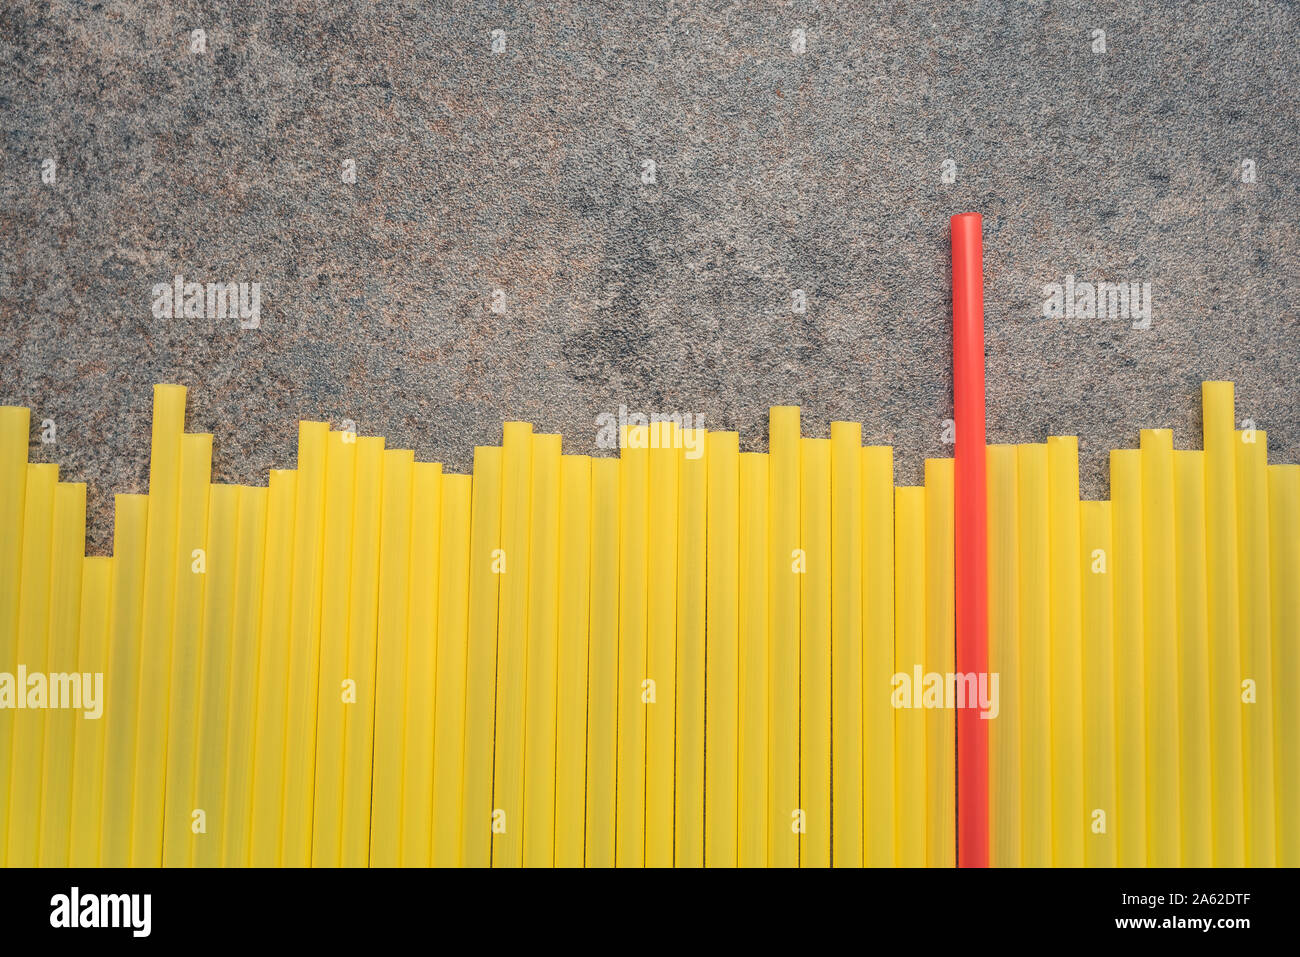 Arranging a situation where a leader is needed in a group of the same people without personality. Background with drinking straws. One red tube. Stock Photo